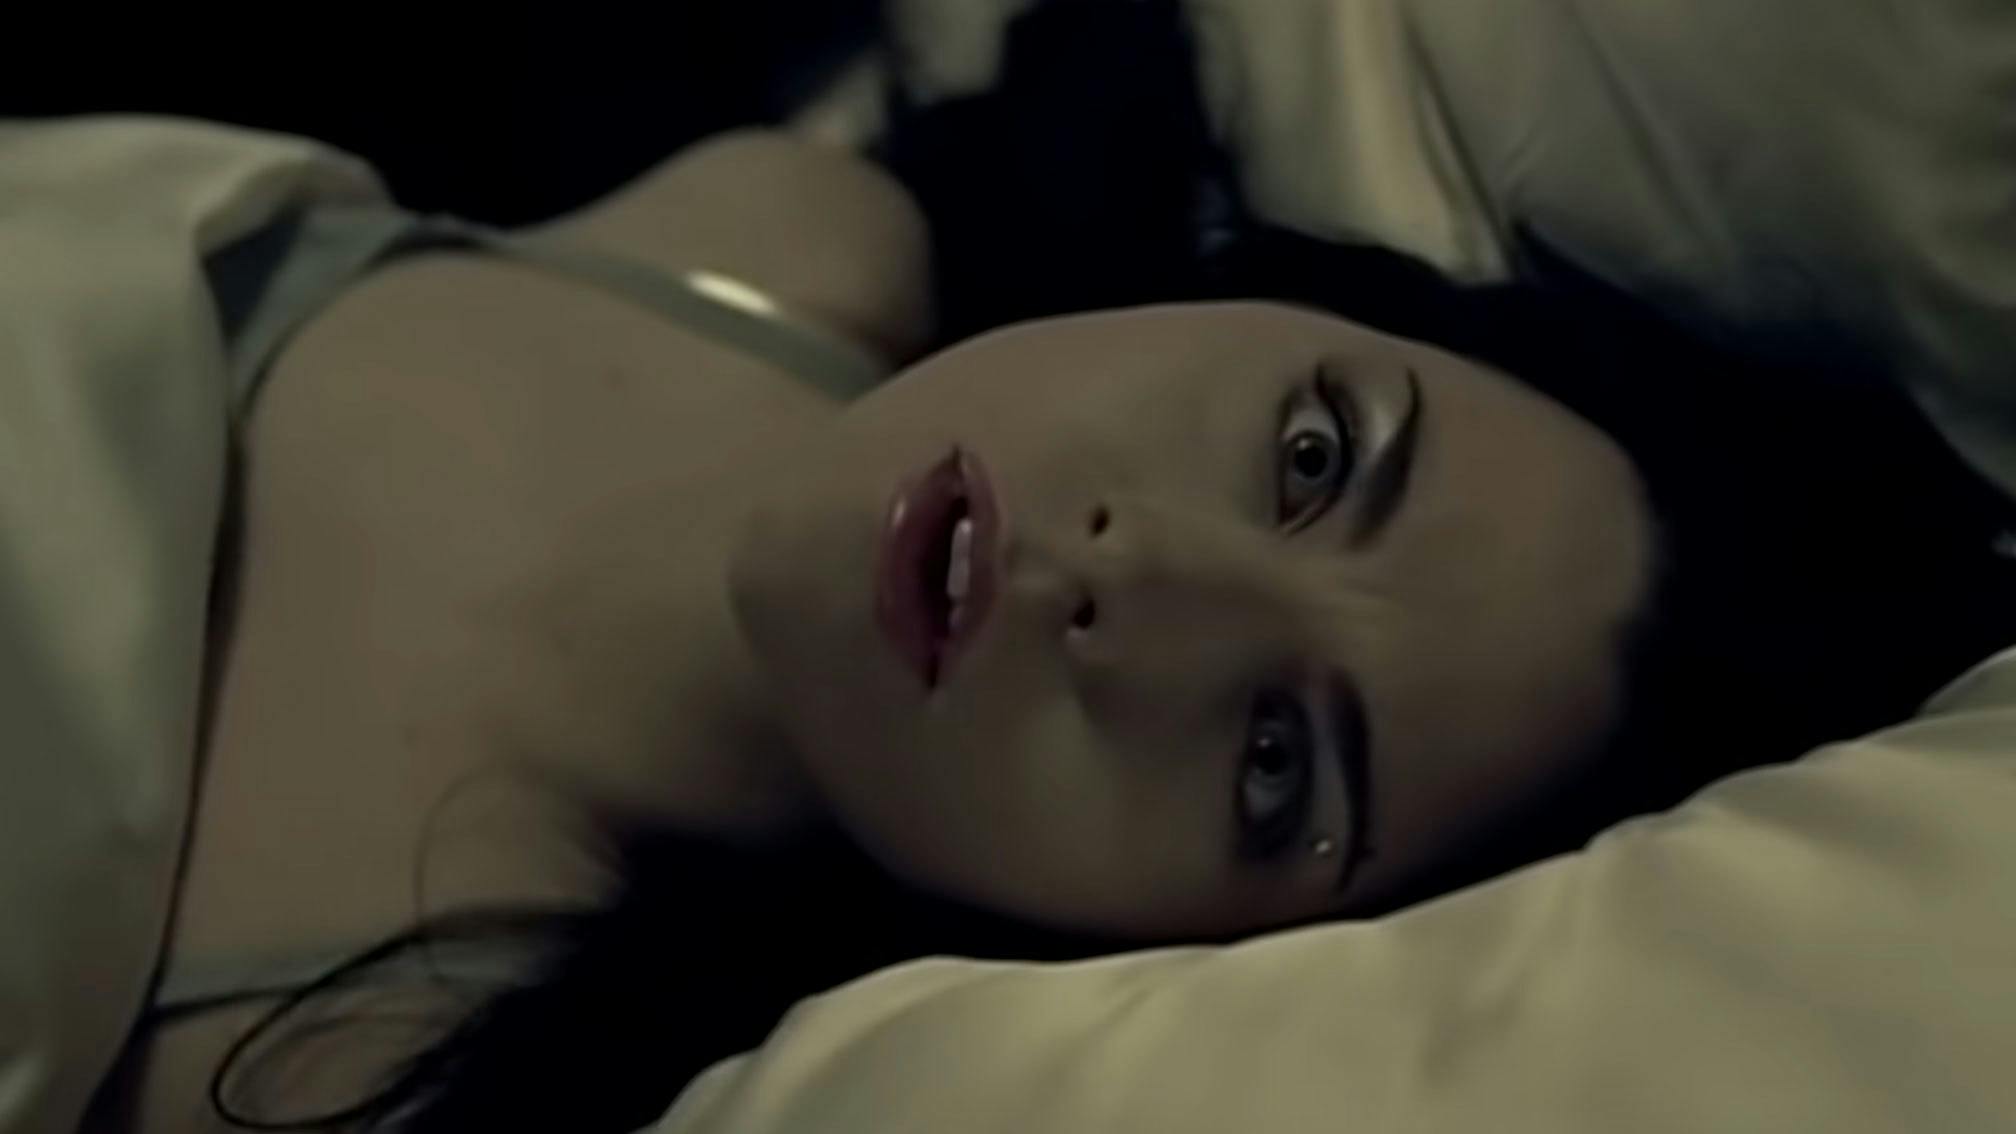 Evanescence’s Bring Me To Life music video has surpassed one billion YouTube views